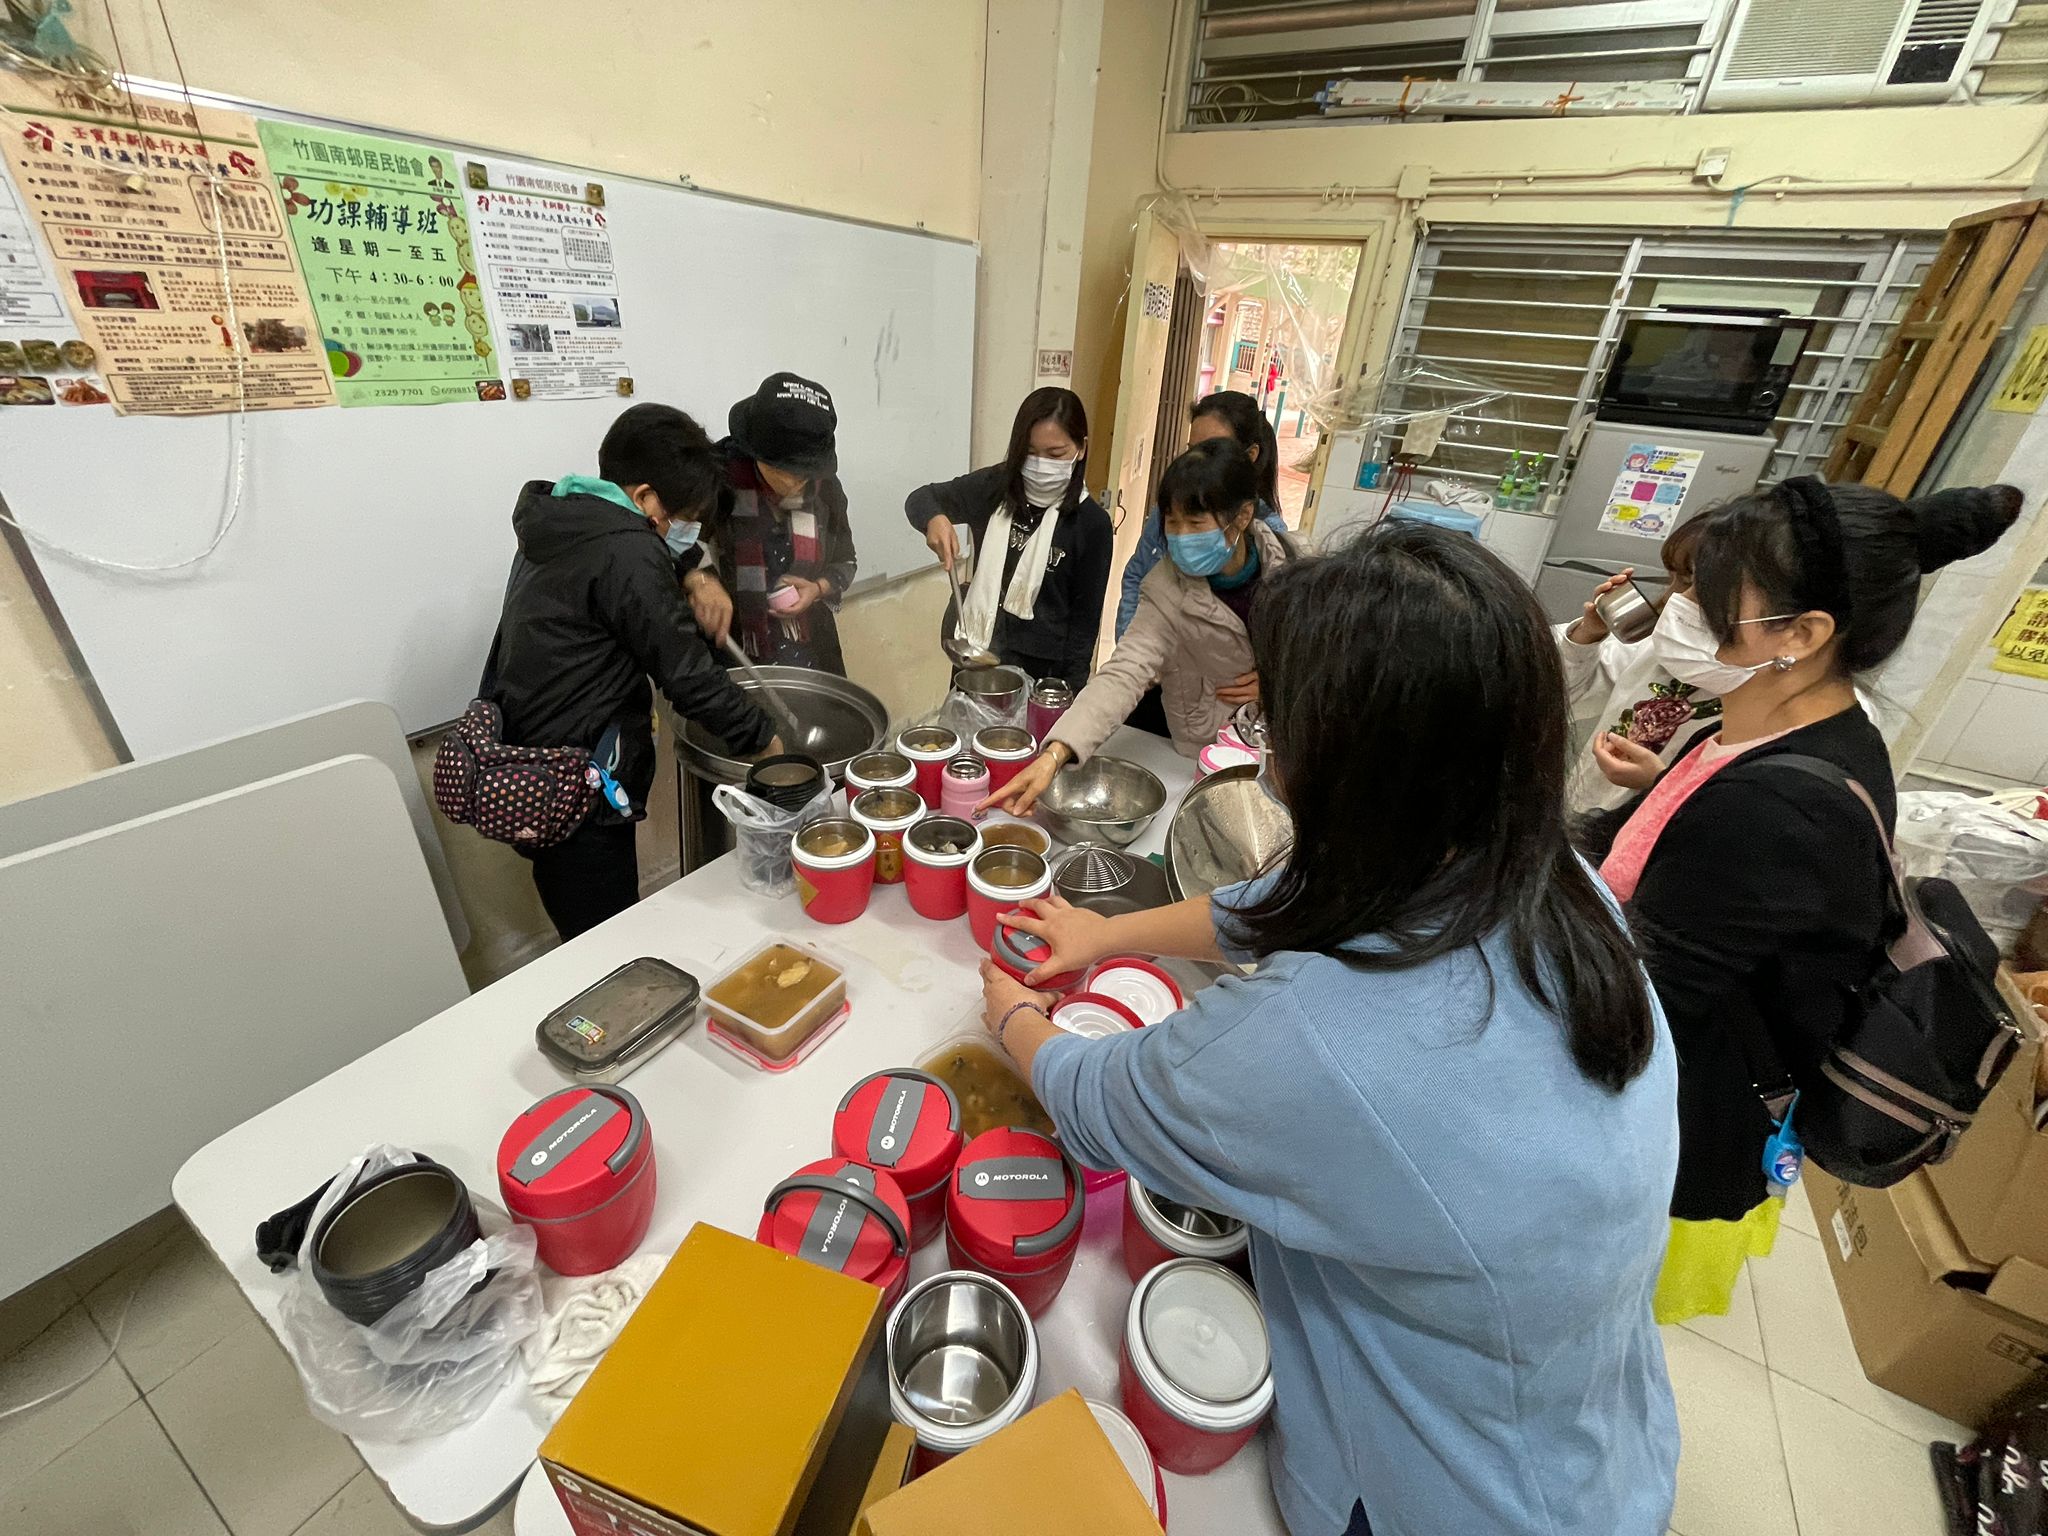 The housewives made soups for the needy elder person in the community together